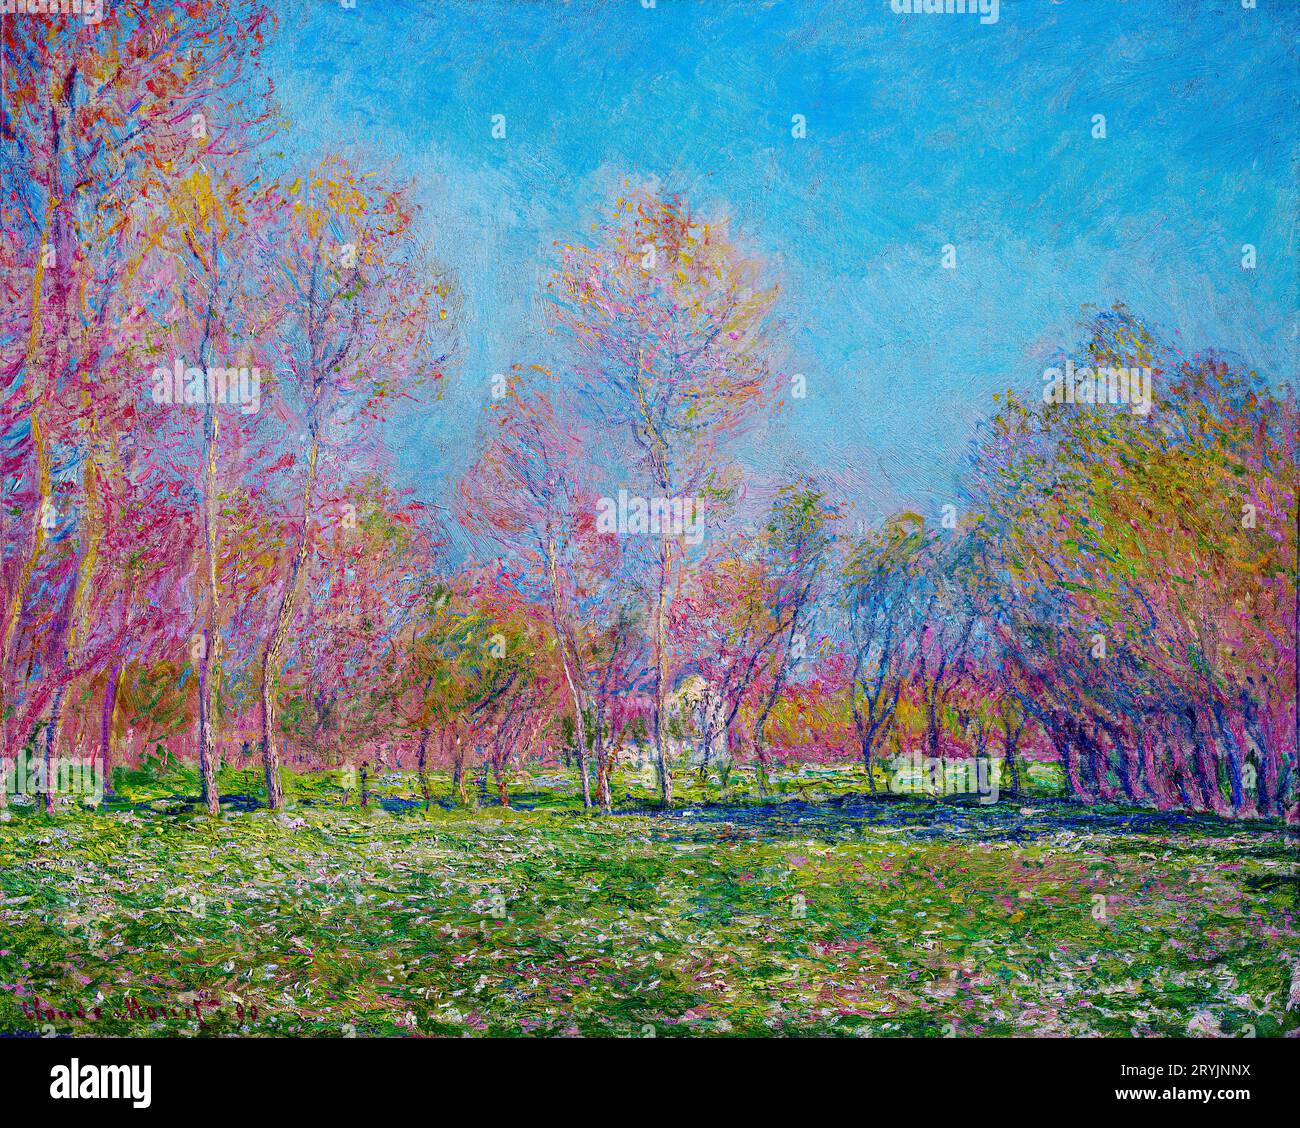 Claude Monet's Spring in Giverny (1890) famous painting. Stock Photo